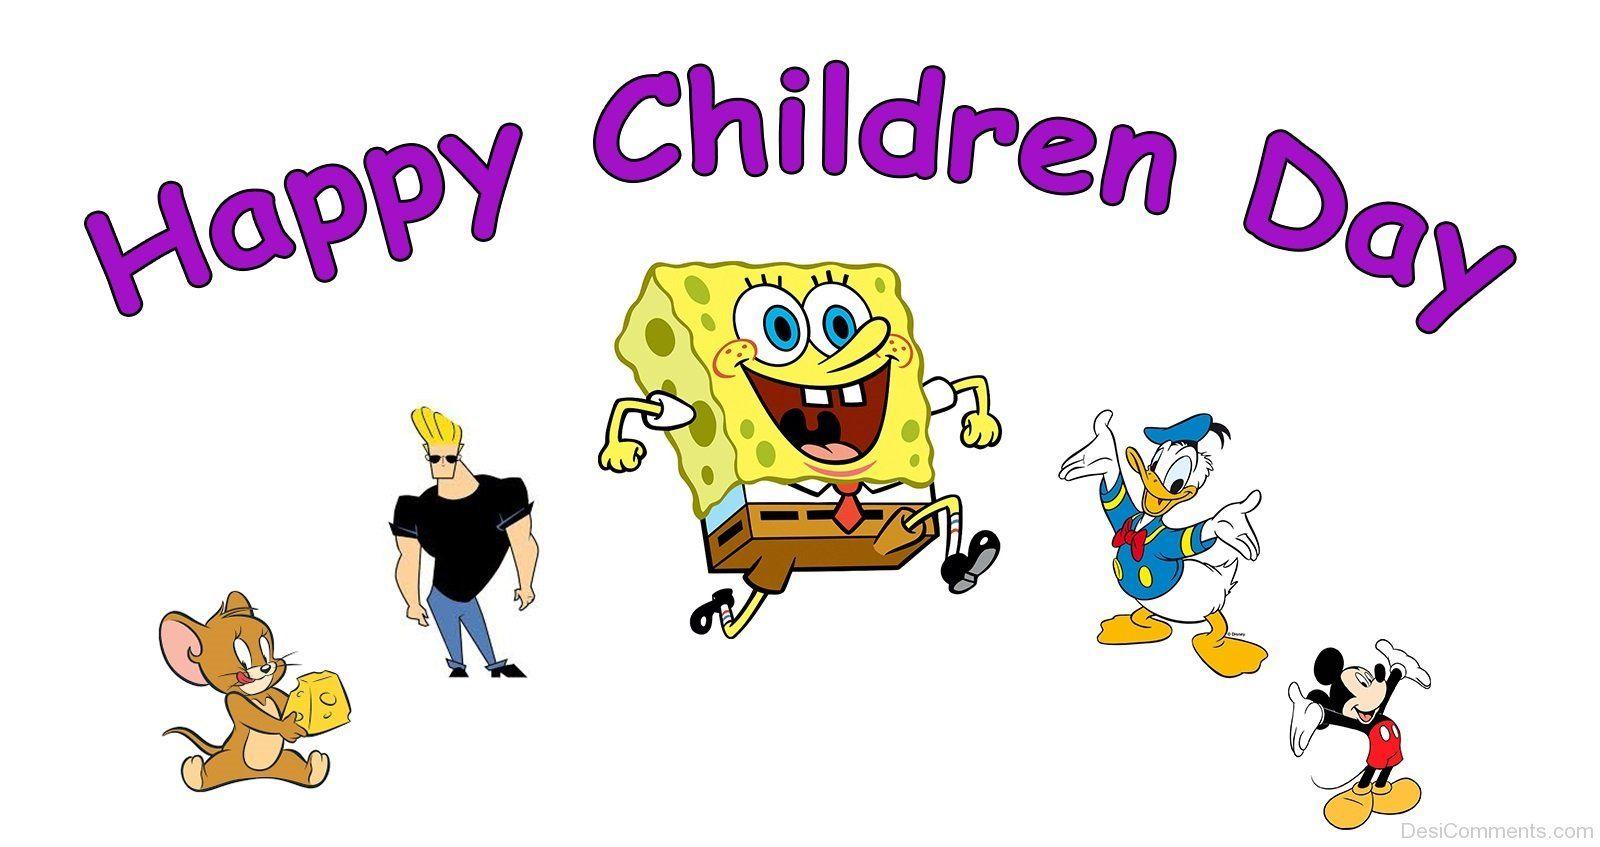 Children's Day Picture, Image, Graphics